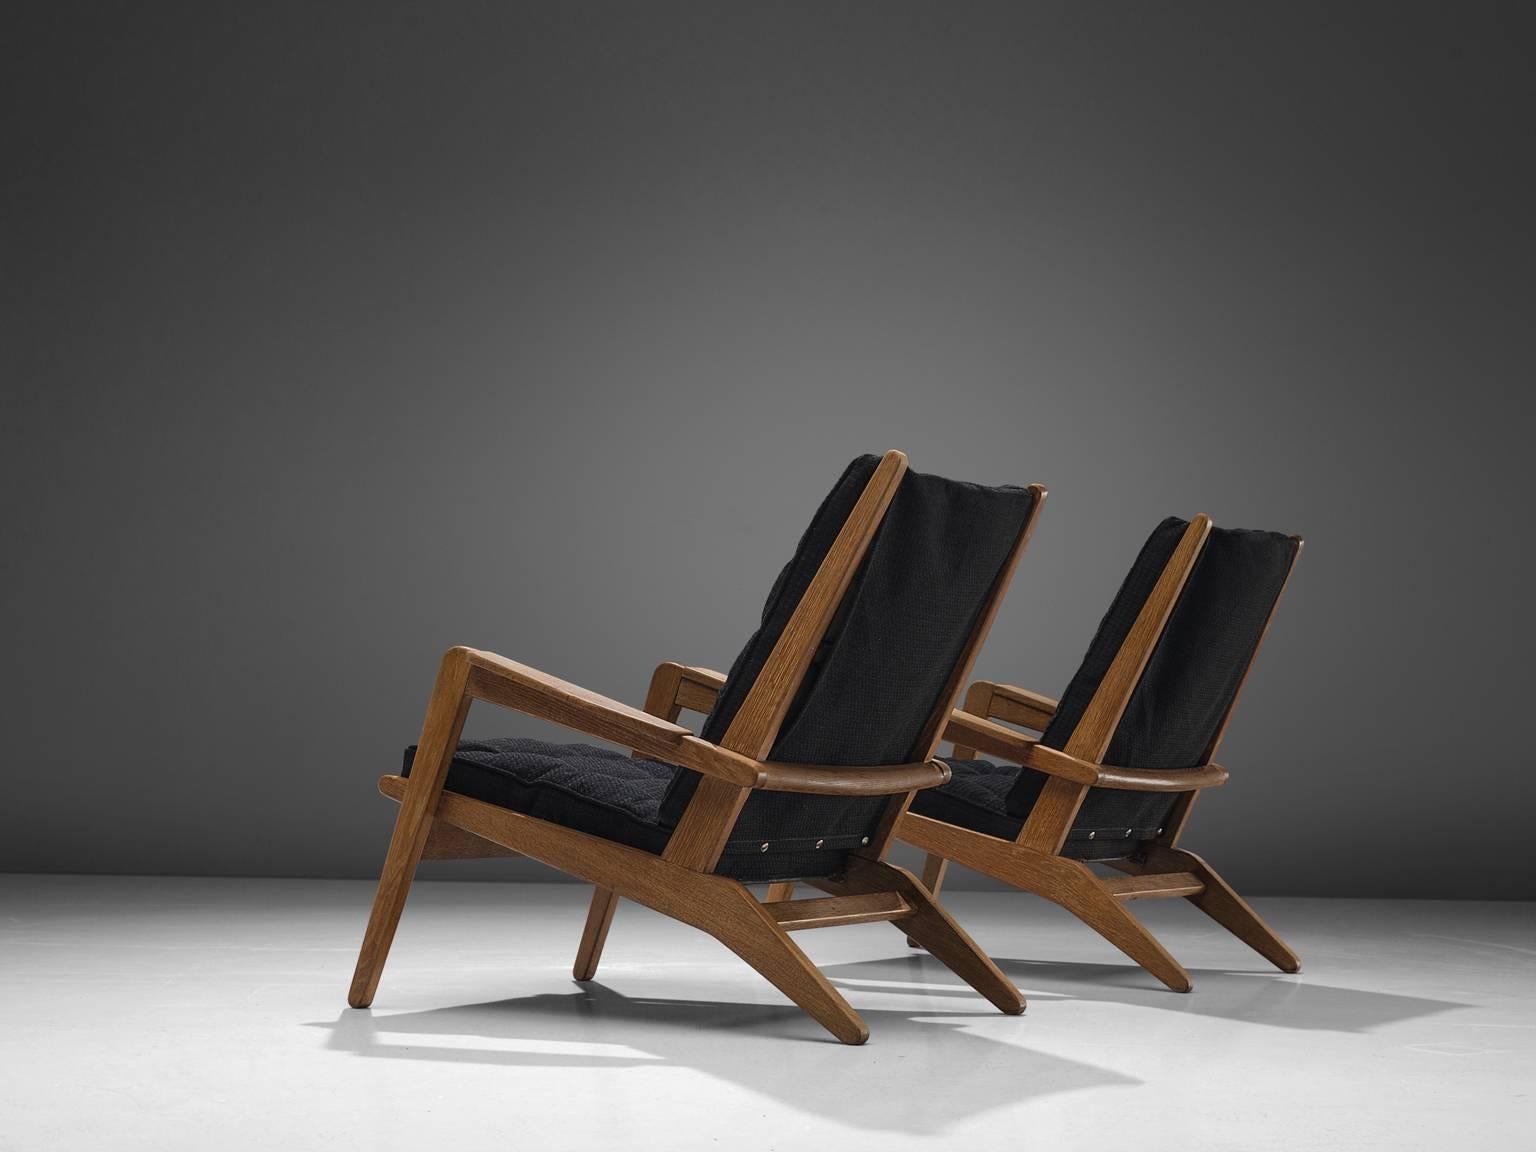 Pierre Guariche for Airborne, pair of lounge chairs model FS 105 model, solid oak, black fabric, France, 1940s.

These armchairs in solid oak are designed by Pierre Guariche for Airborne. The structure with spring system supports the two thick